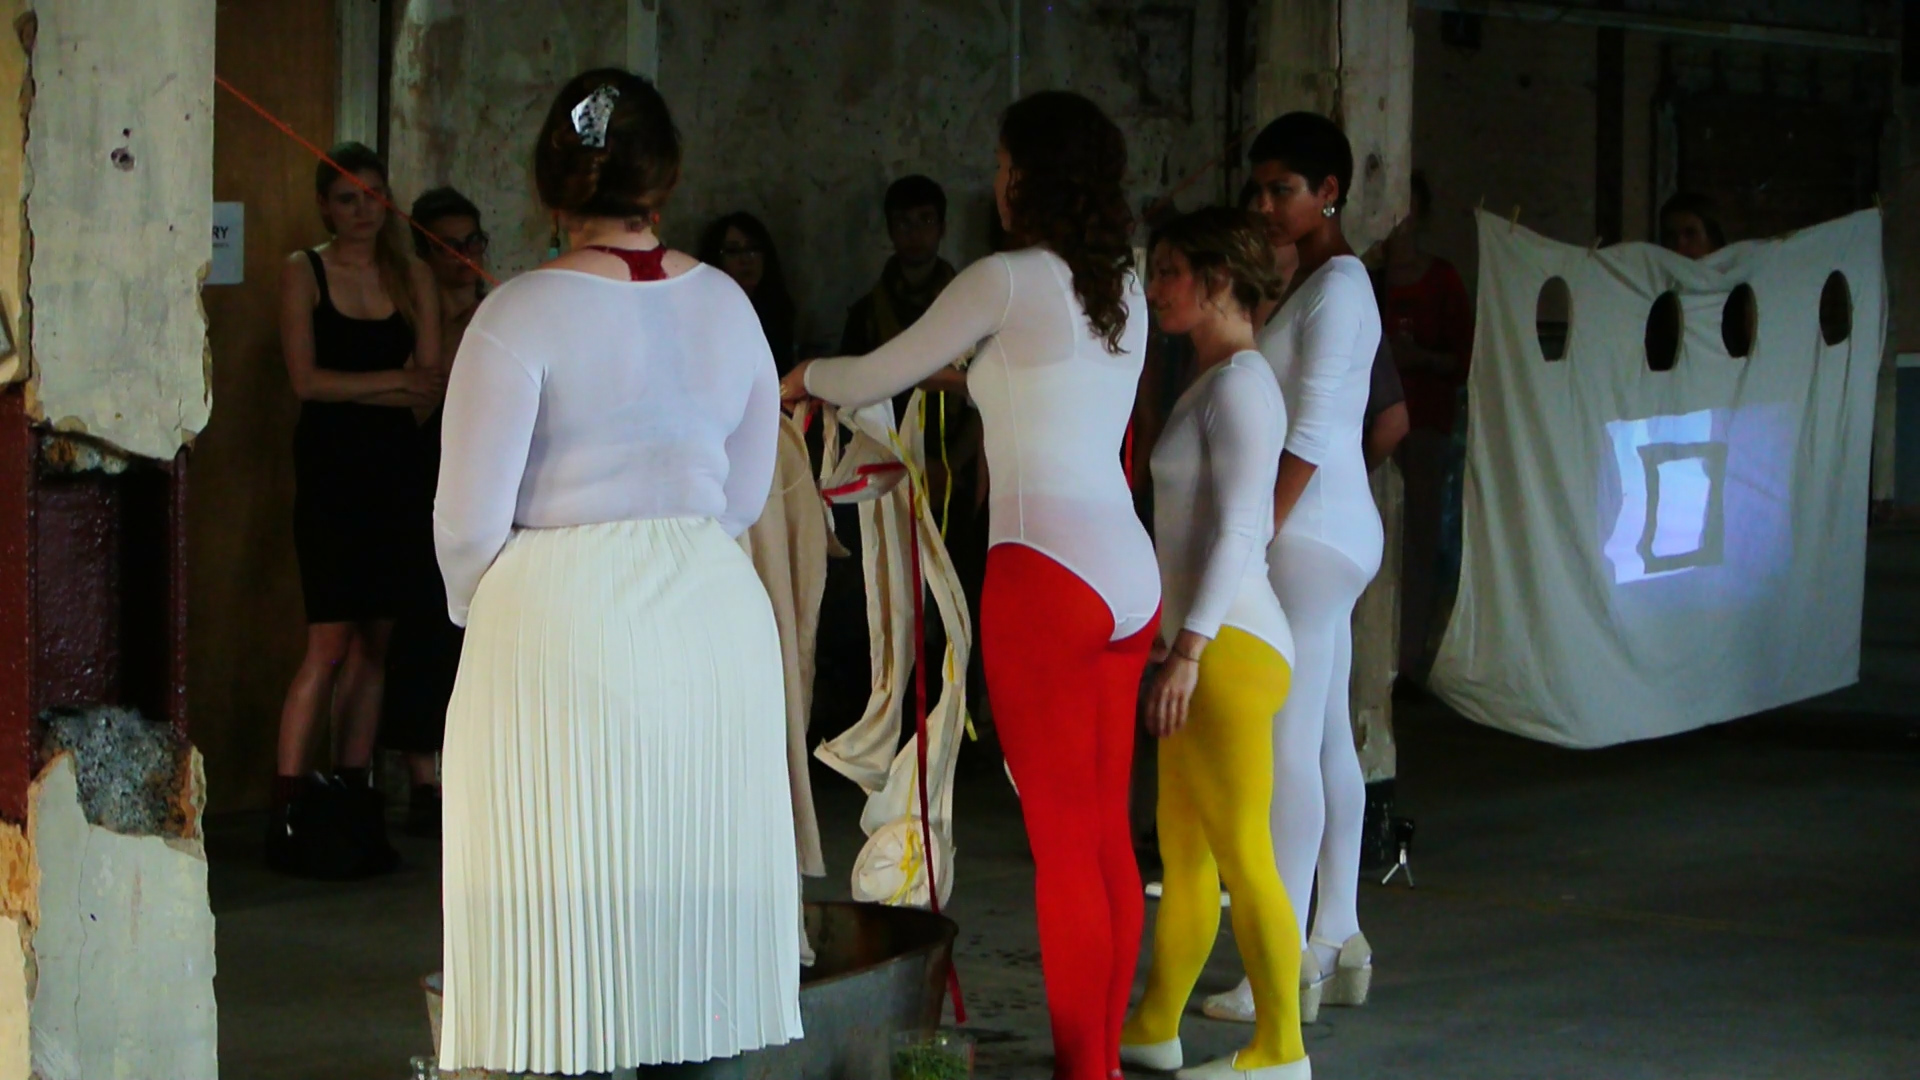  Still from Performance of "Emilia Galotti's Colouring Book of Feelings," written by Sophie Seita at the Bargehouse/ Oxo Tower Wharf for Art Night 2018 in London. Installation featuring video by Simone Kearney and Lanny Jordan Jackson. Audio work by 